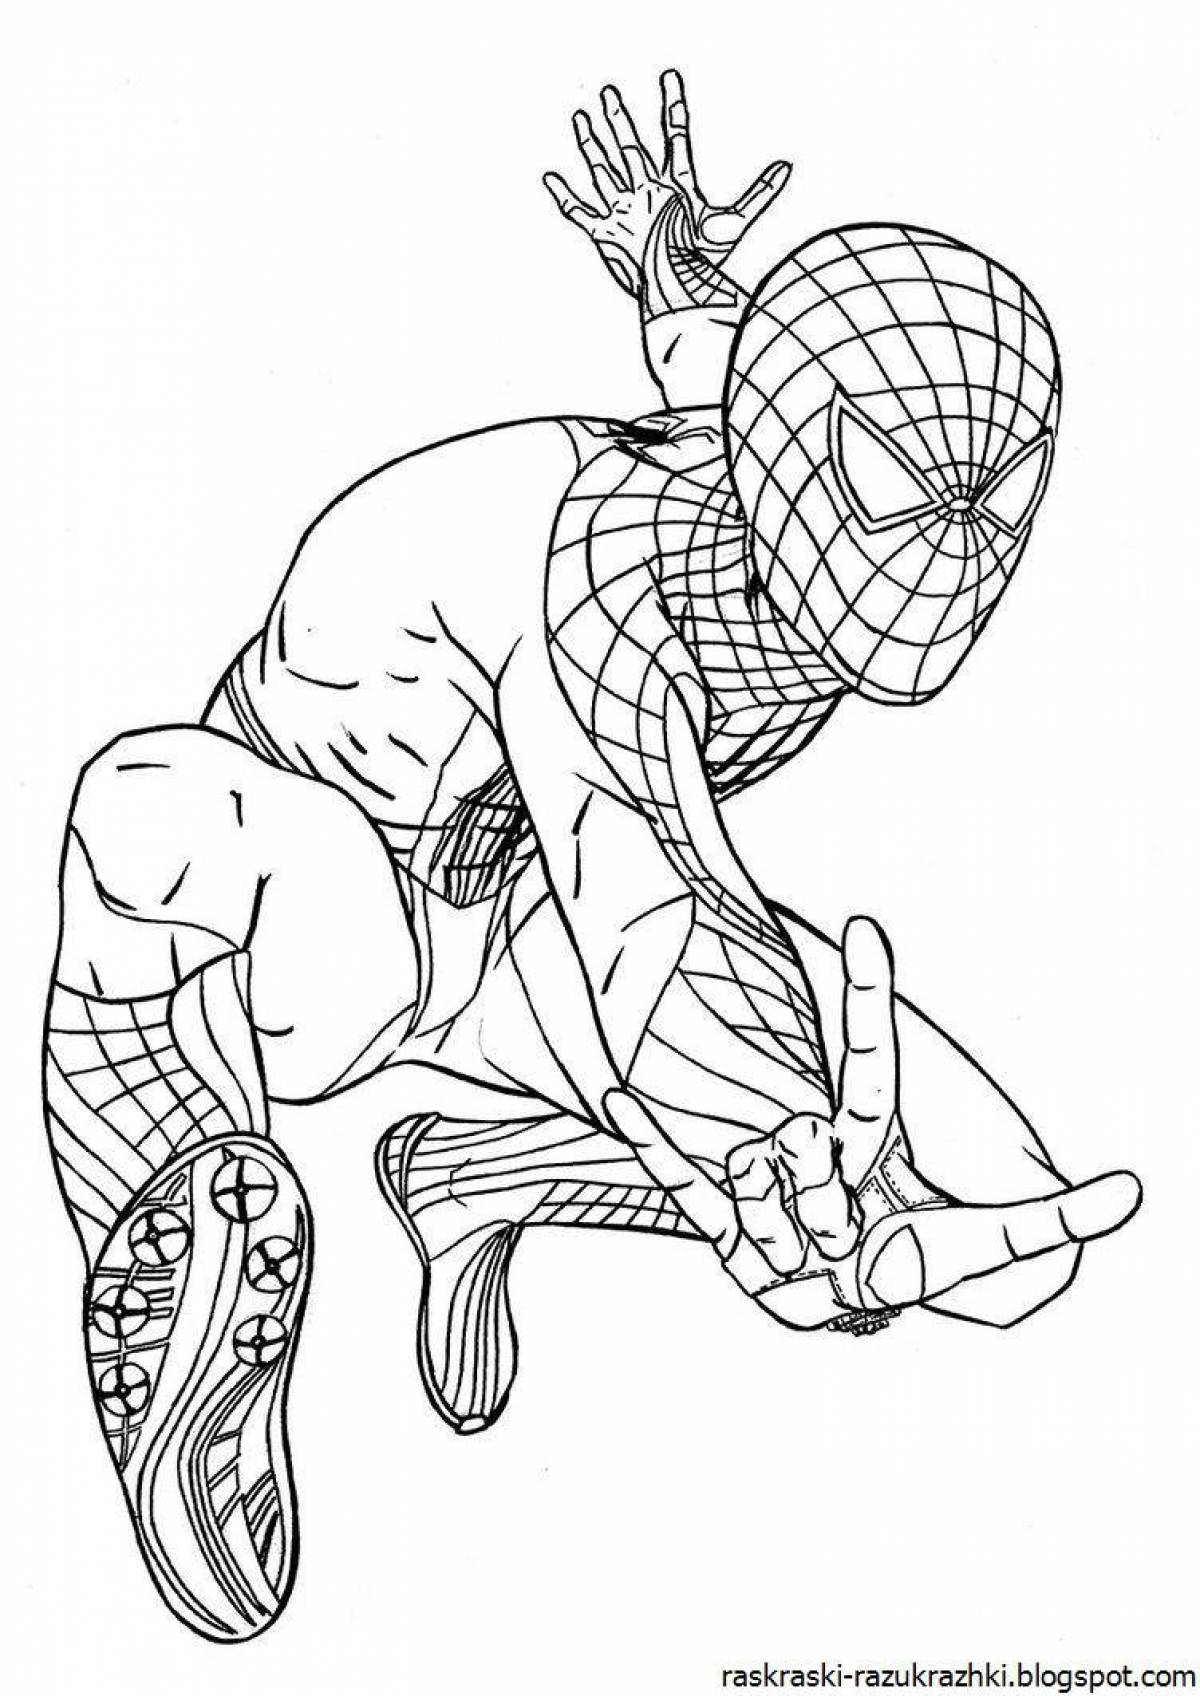 Spiderman's marvelous coloring book